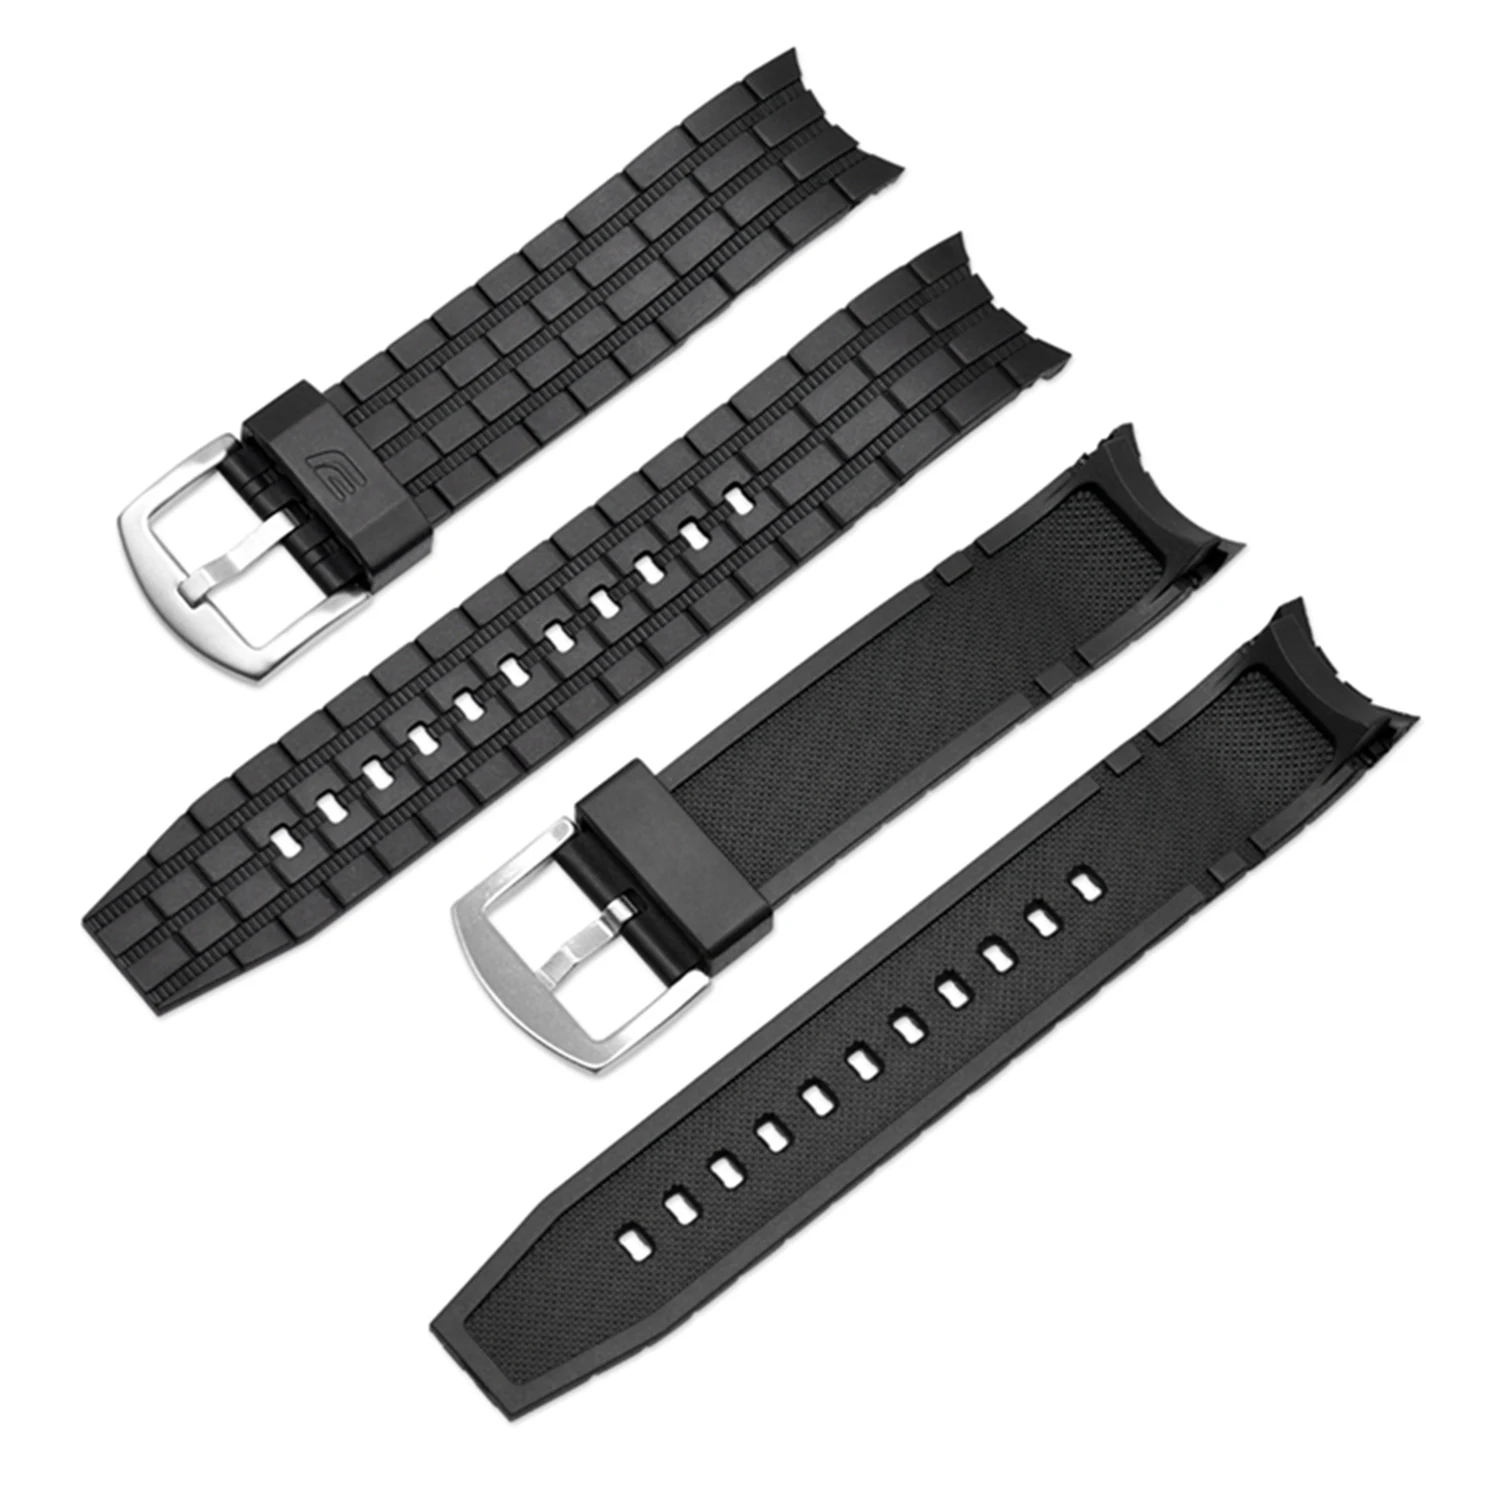 Gosear Adjustable Watchband Breathable Replacement Watch Strap Band Wristband for Casio Edifice EF 550 EF 523